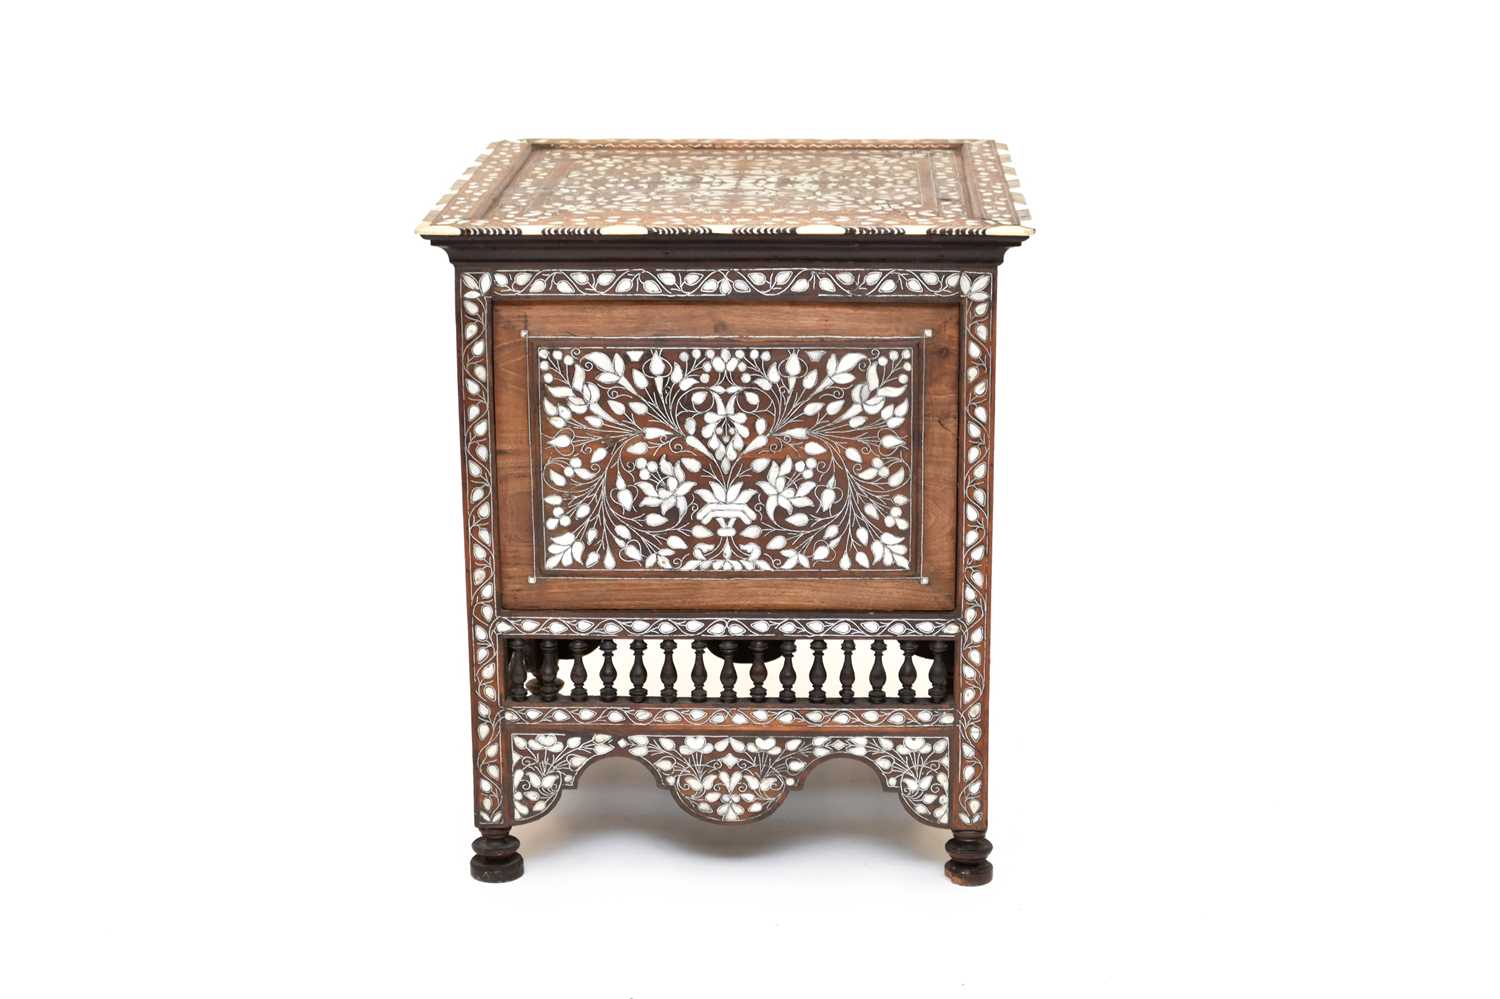 Lot 243 - A 19th century Syrian, square occasional table, inlaid with bone and white metal